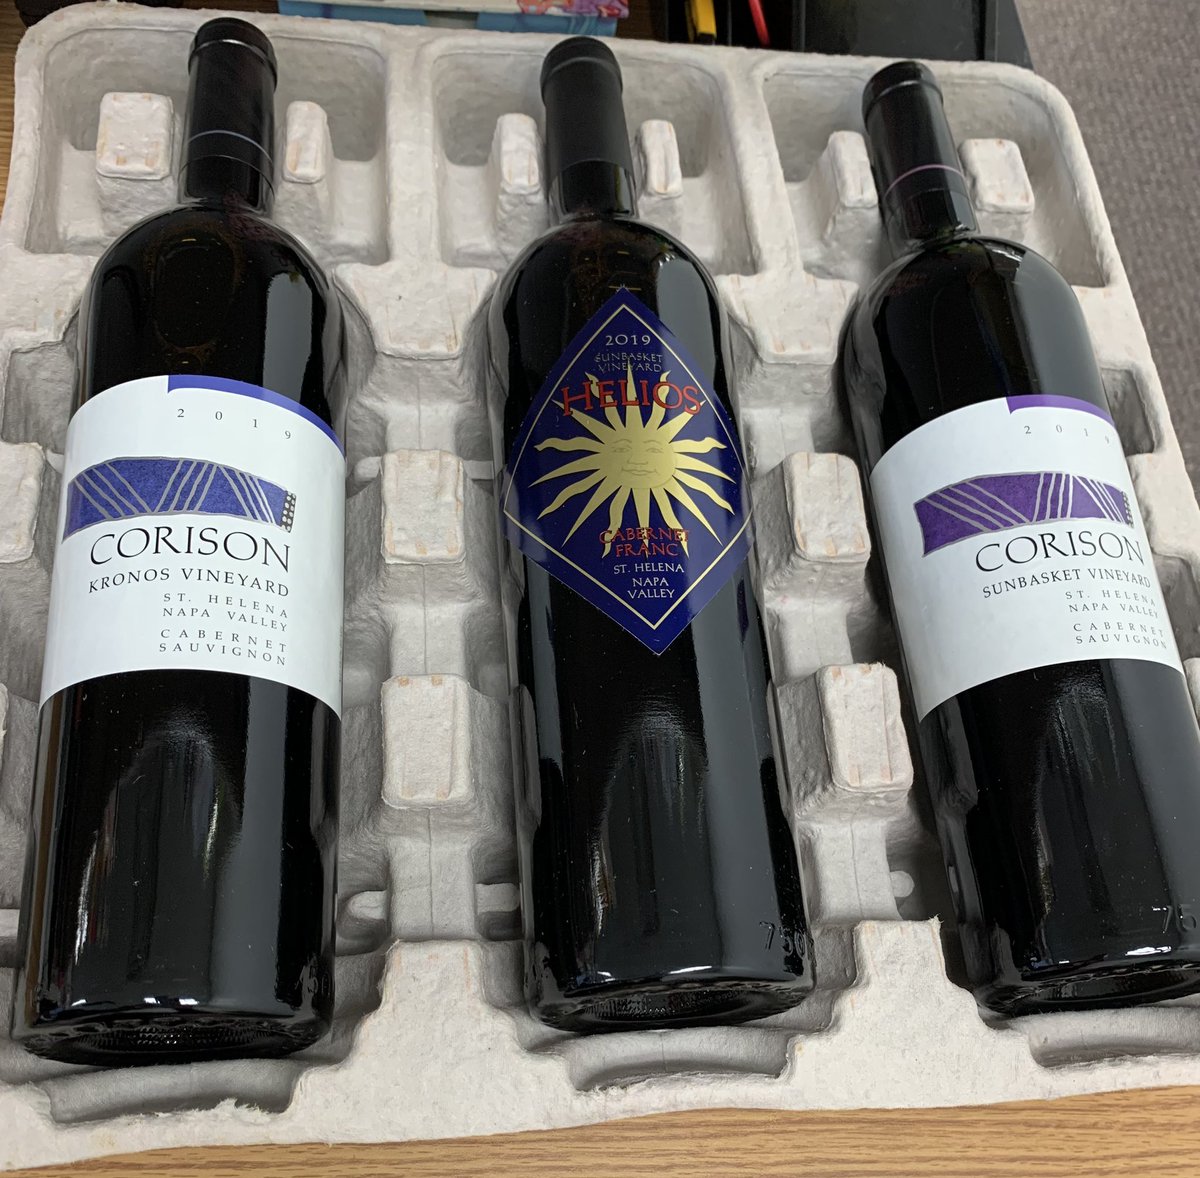 I love it when my @corisonwinery shipments get delivered. It feels like Christmas all over again! #CabernetSauvignon #CabFranc #NapaValley #WomanWinemaker